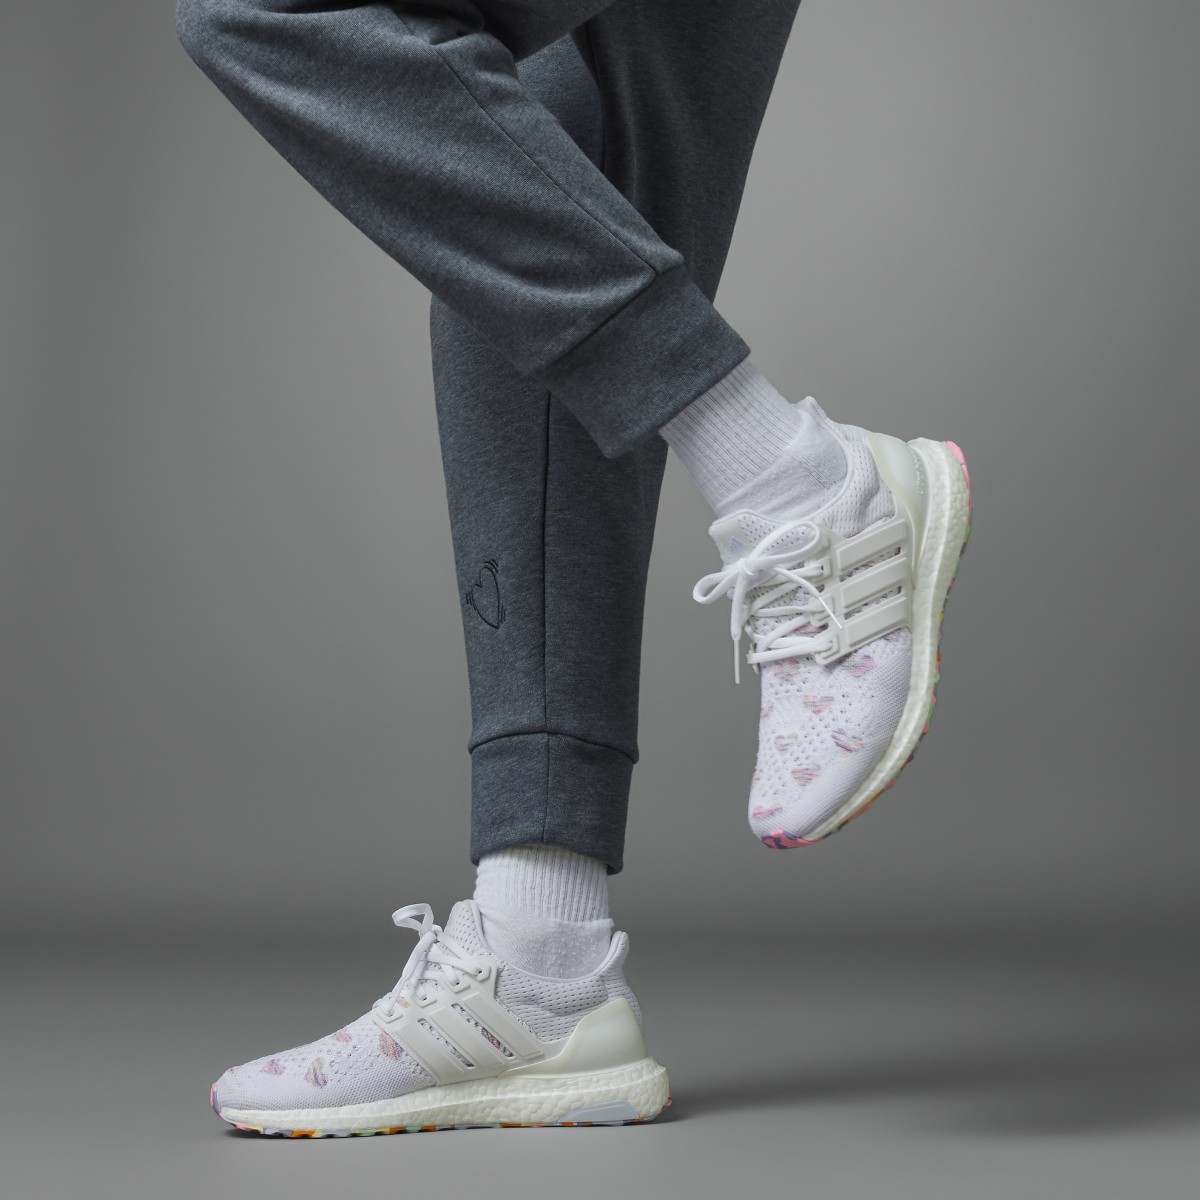 Adidas Valentine's Day Ultraboost 1.0 Shoes. 8